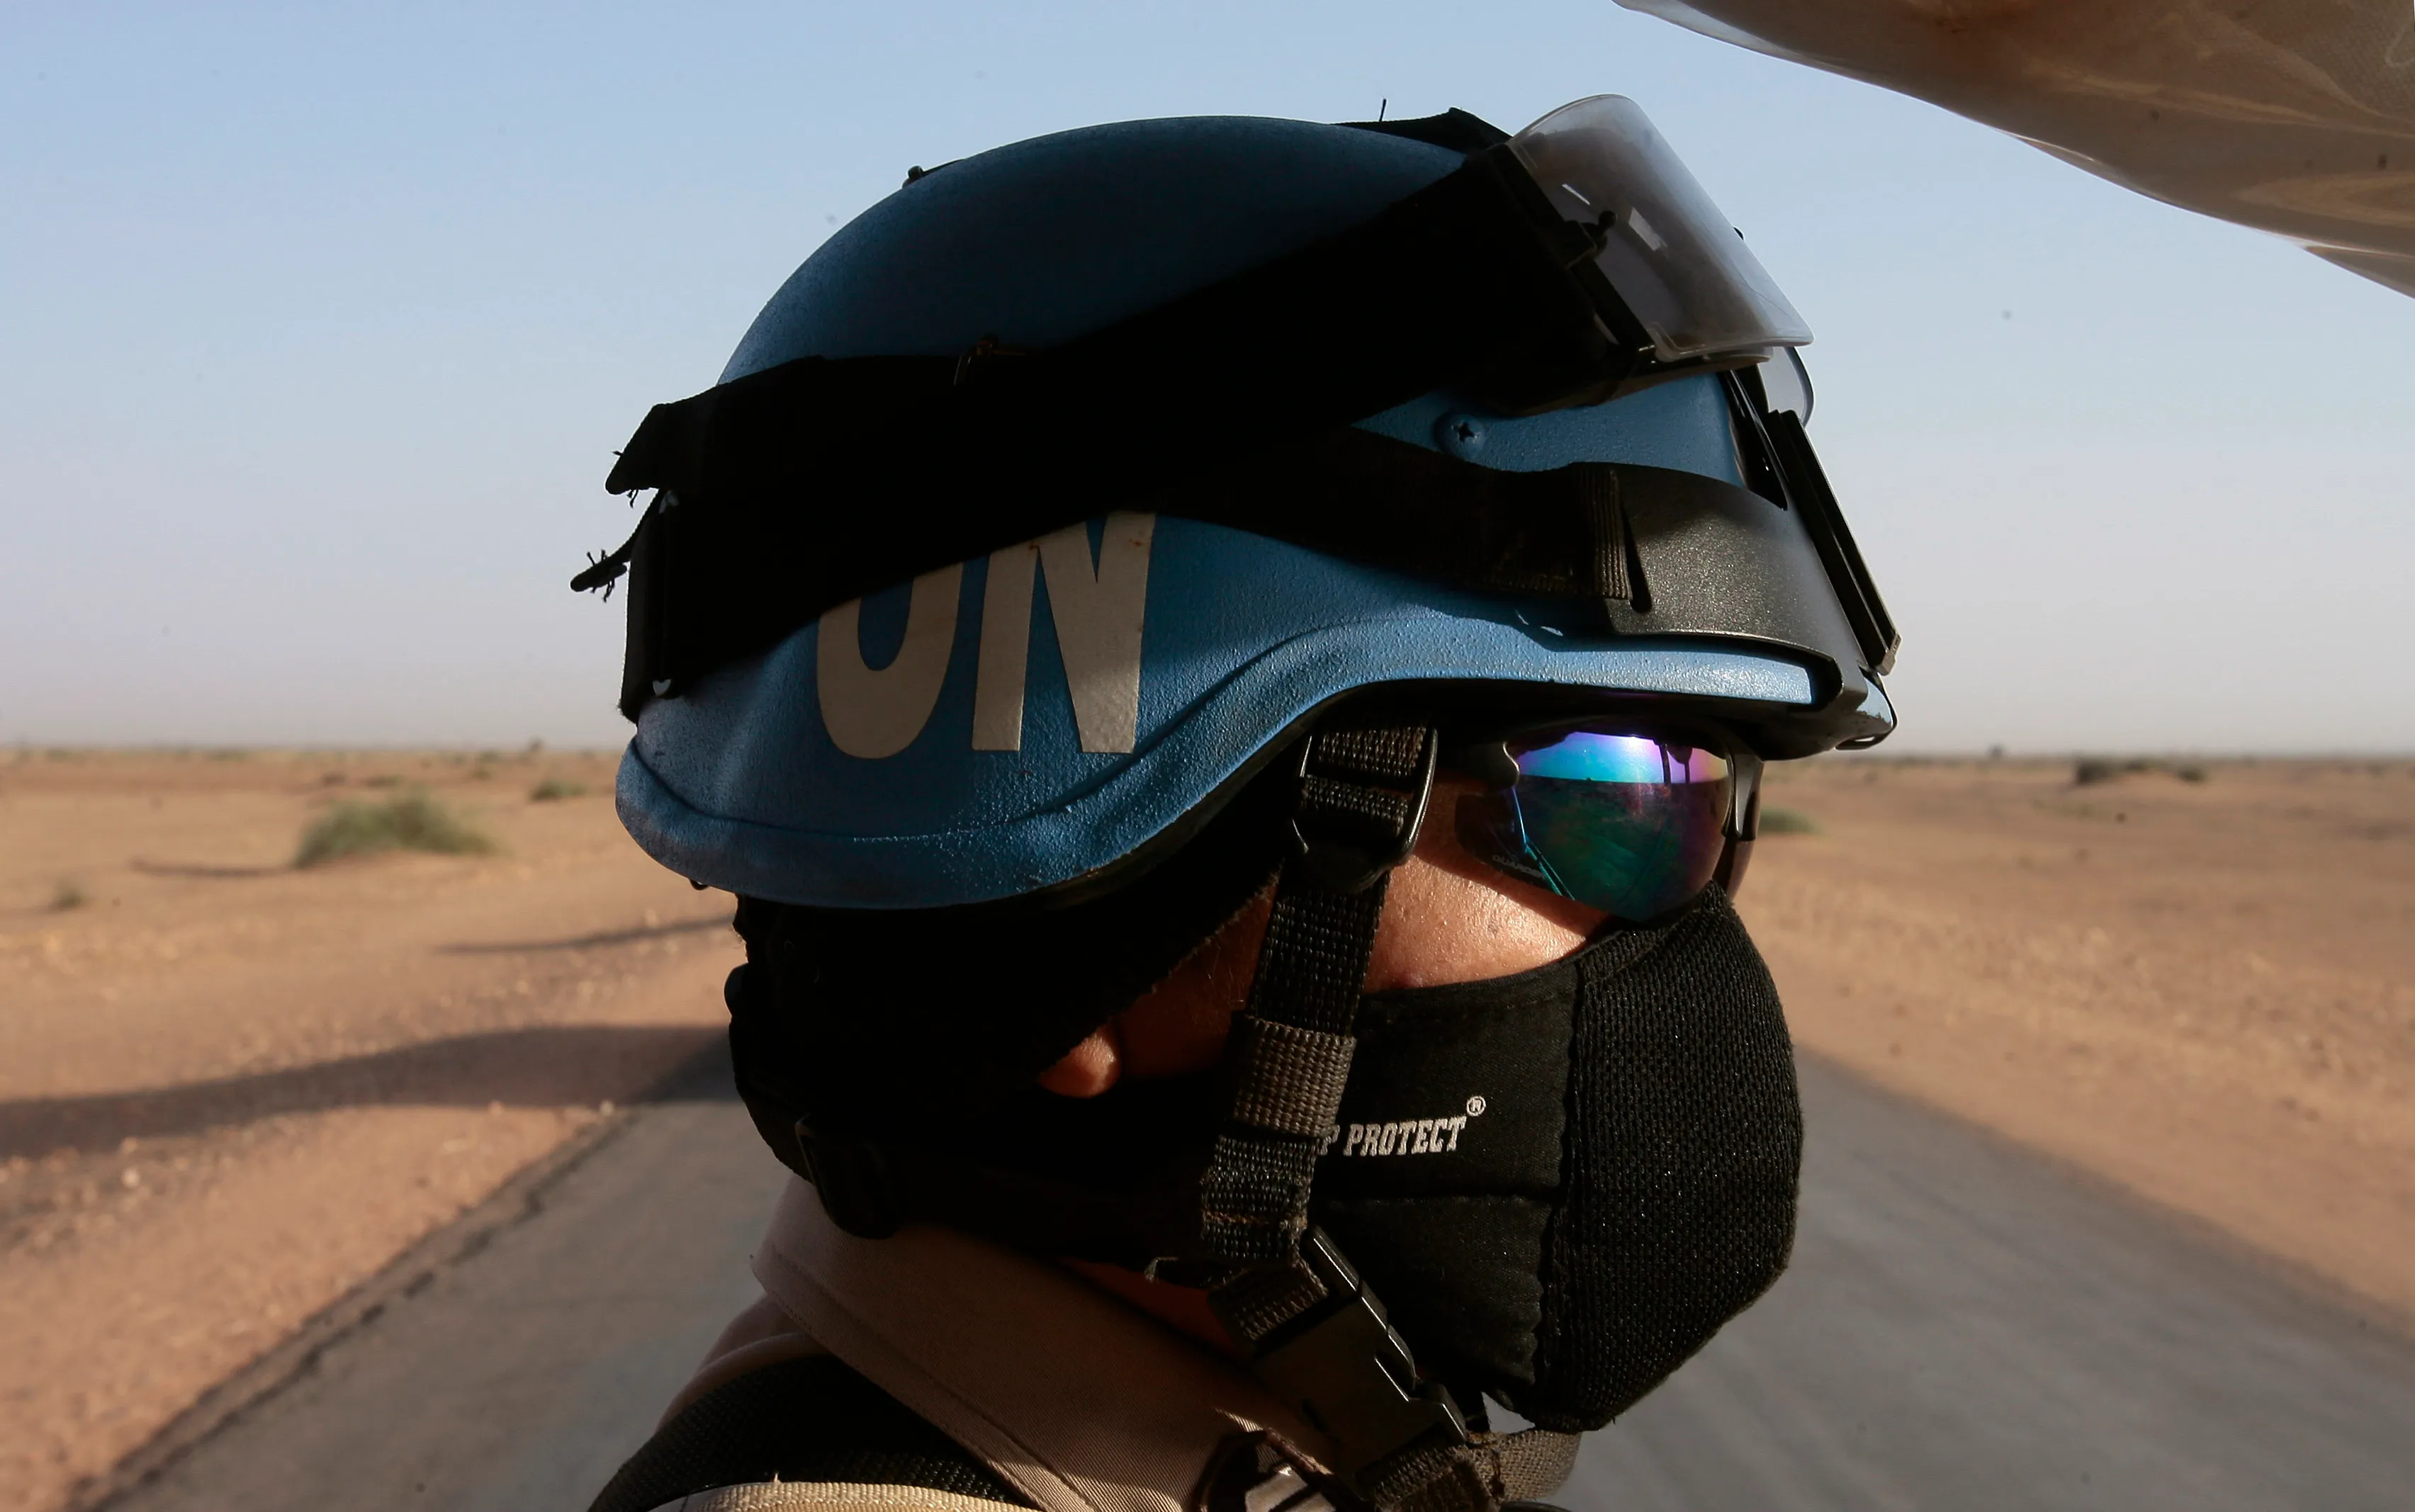 Time for American GIs to become U.N. peacekeepers